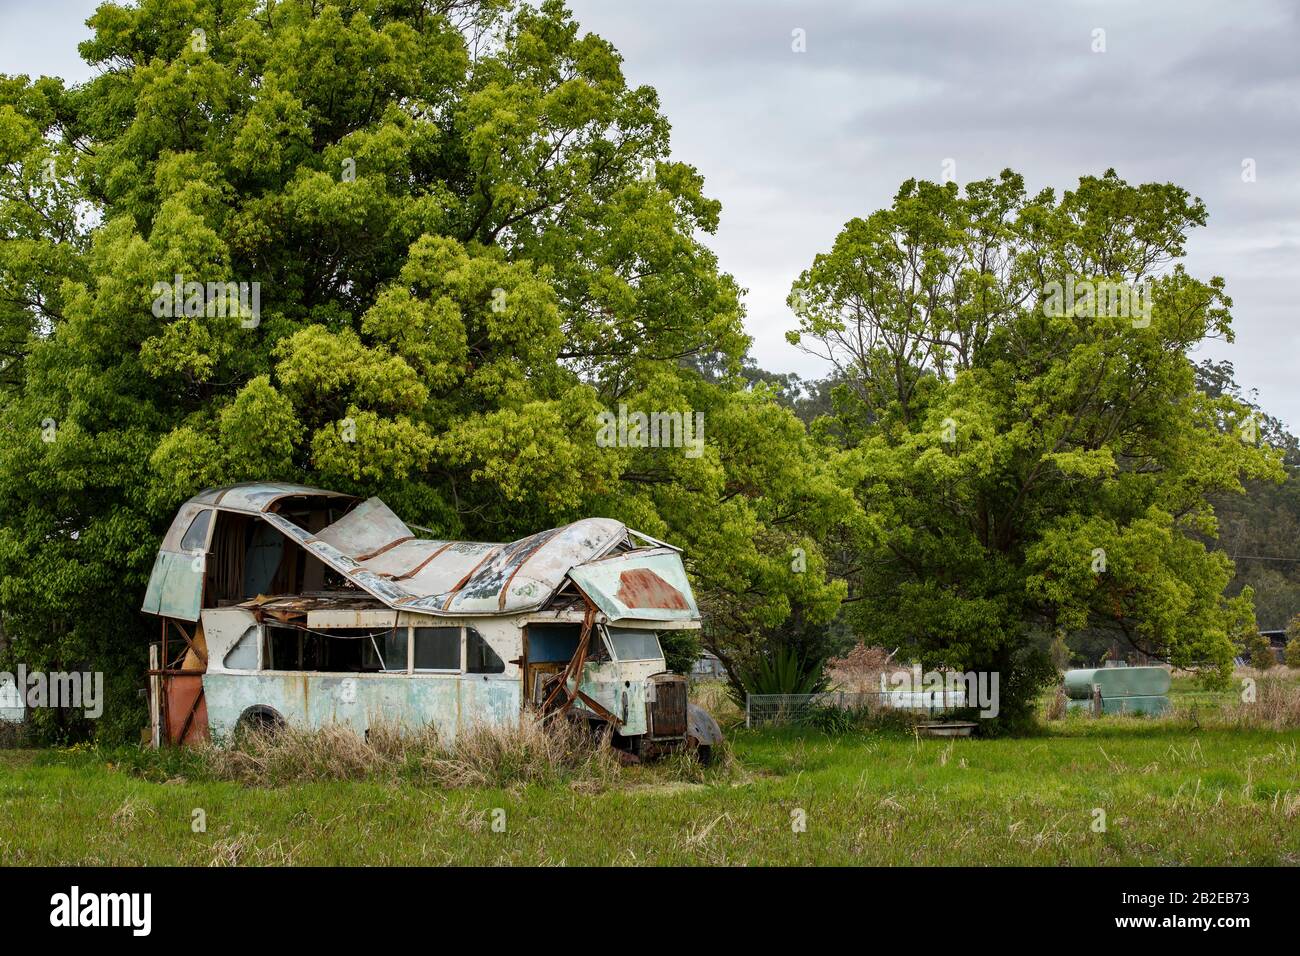 rusted and abandoned bus or truck with severe roof damage Stock Photo